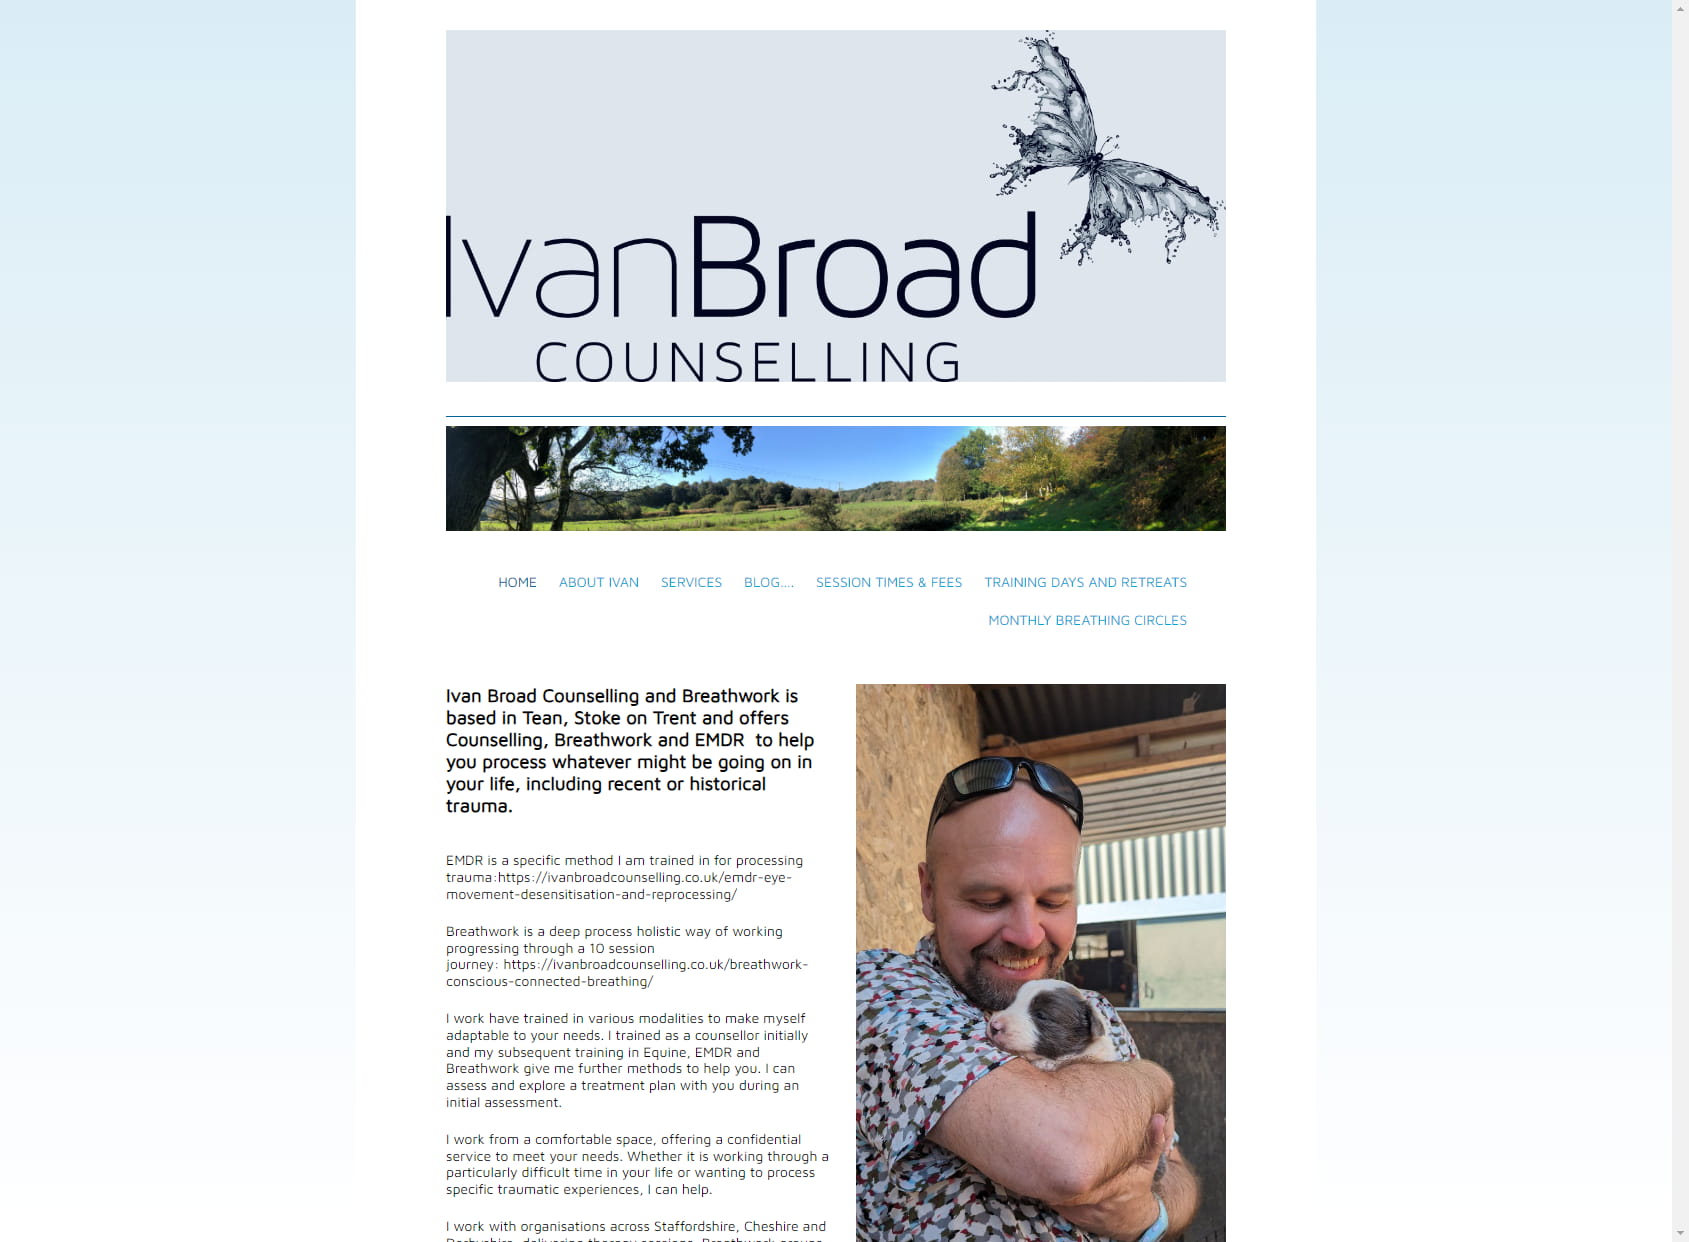 Ivan Broad Counselling and Breathwork